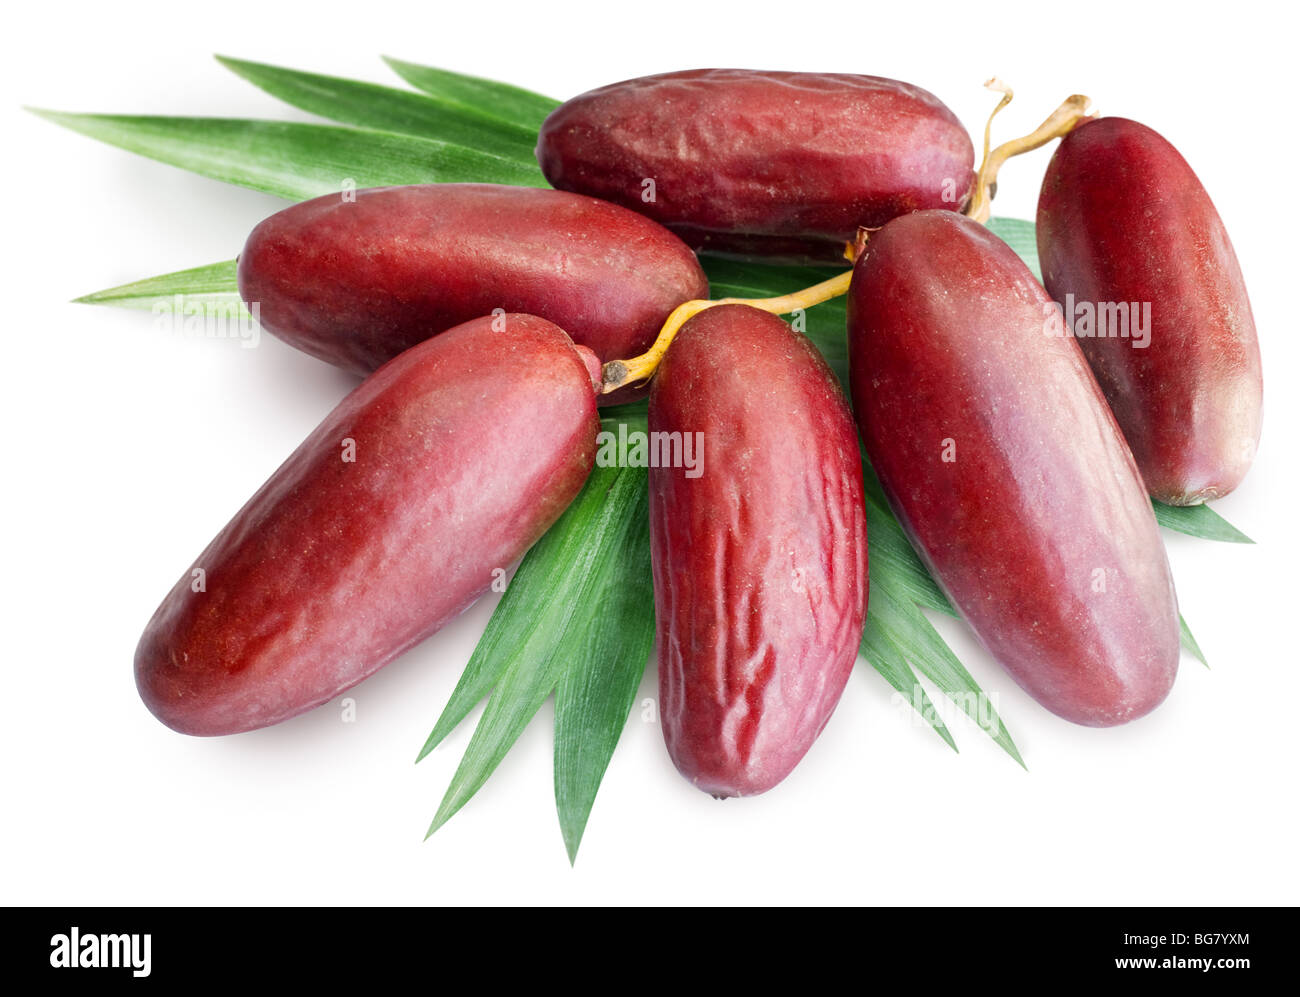 cluster of dates with leaves on a white background Stock Photo